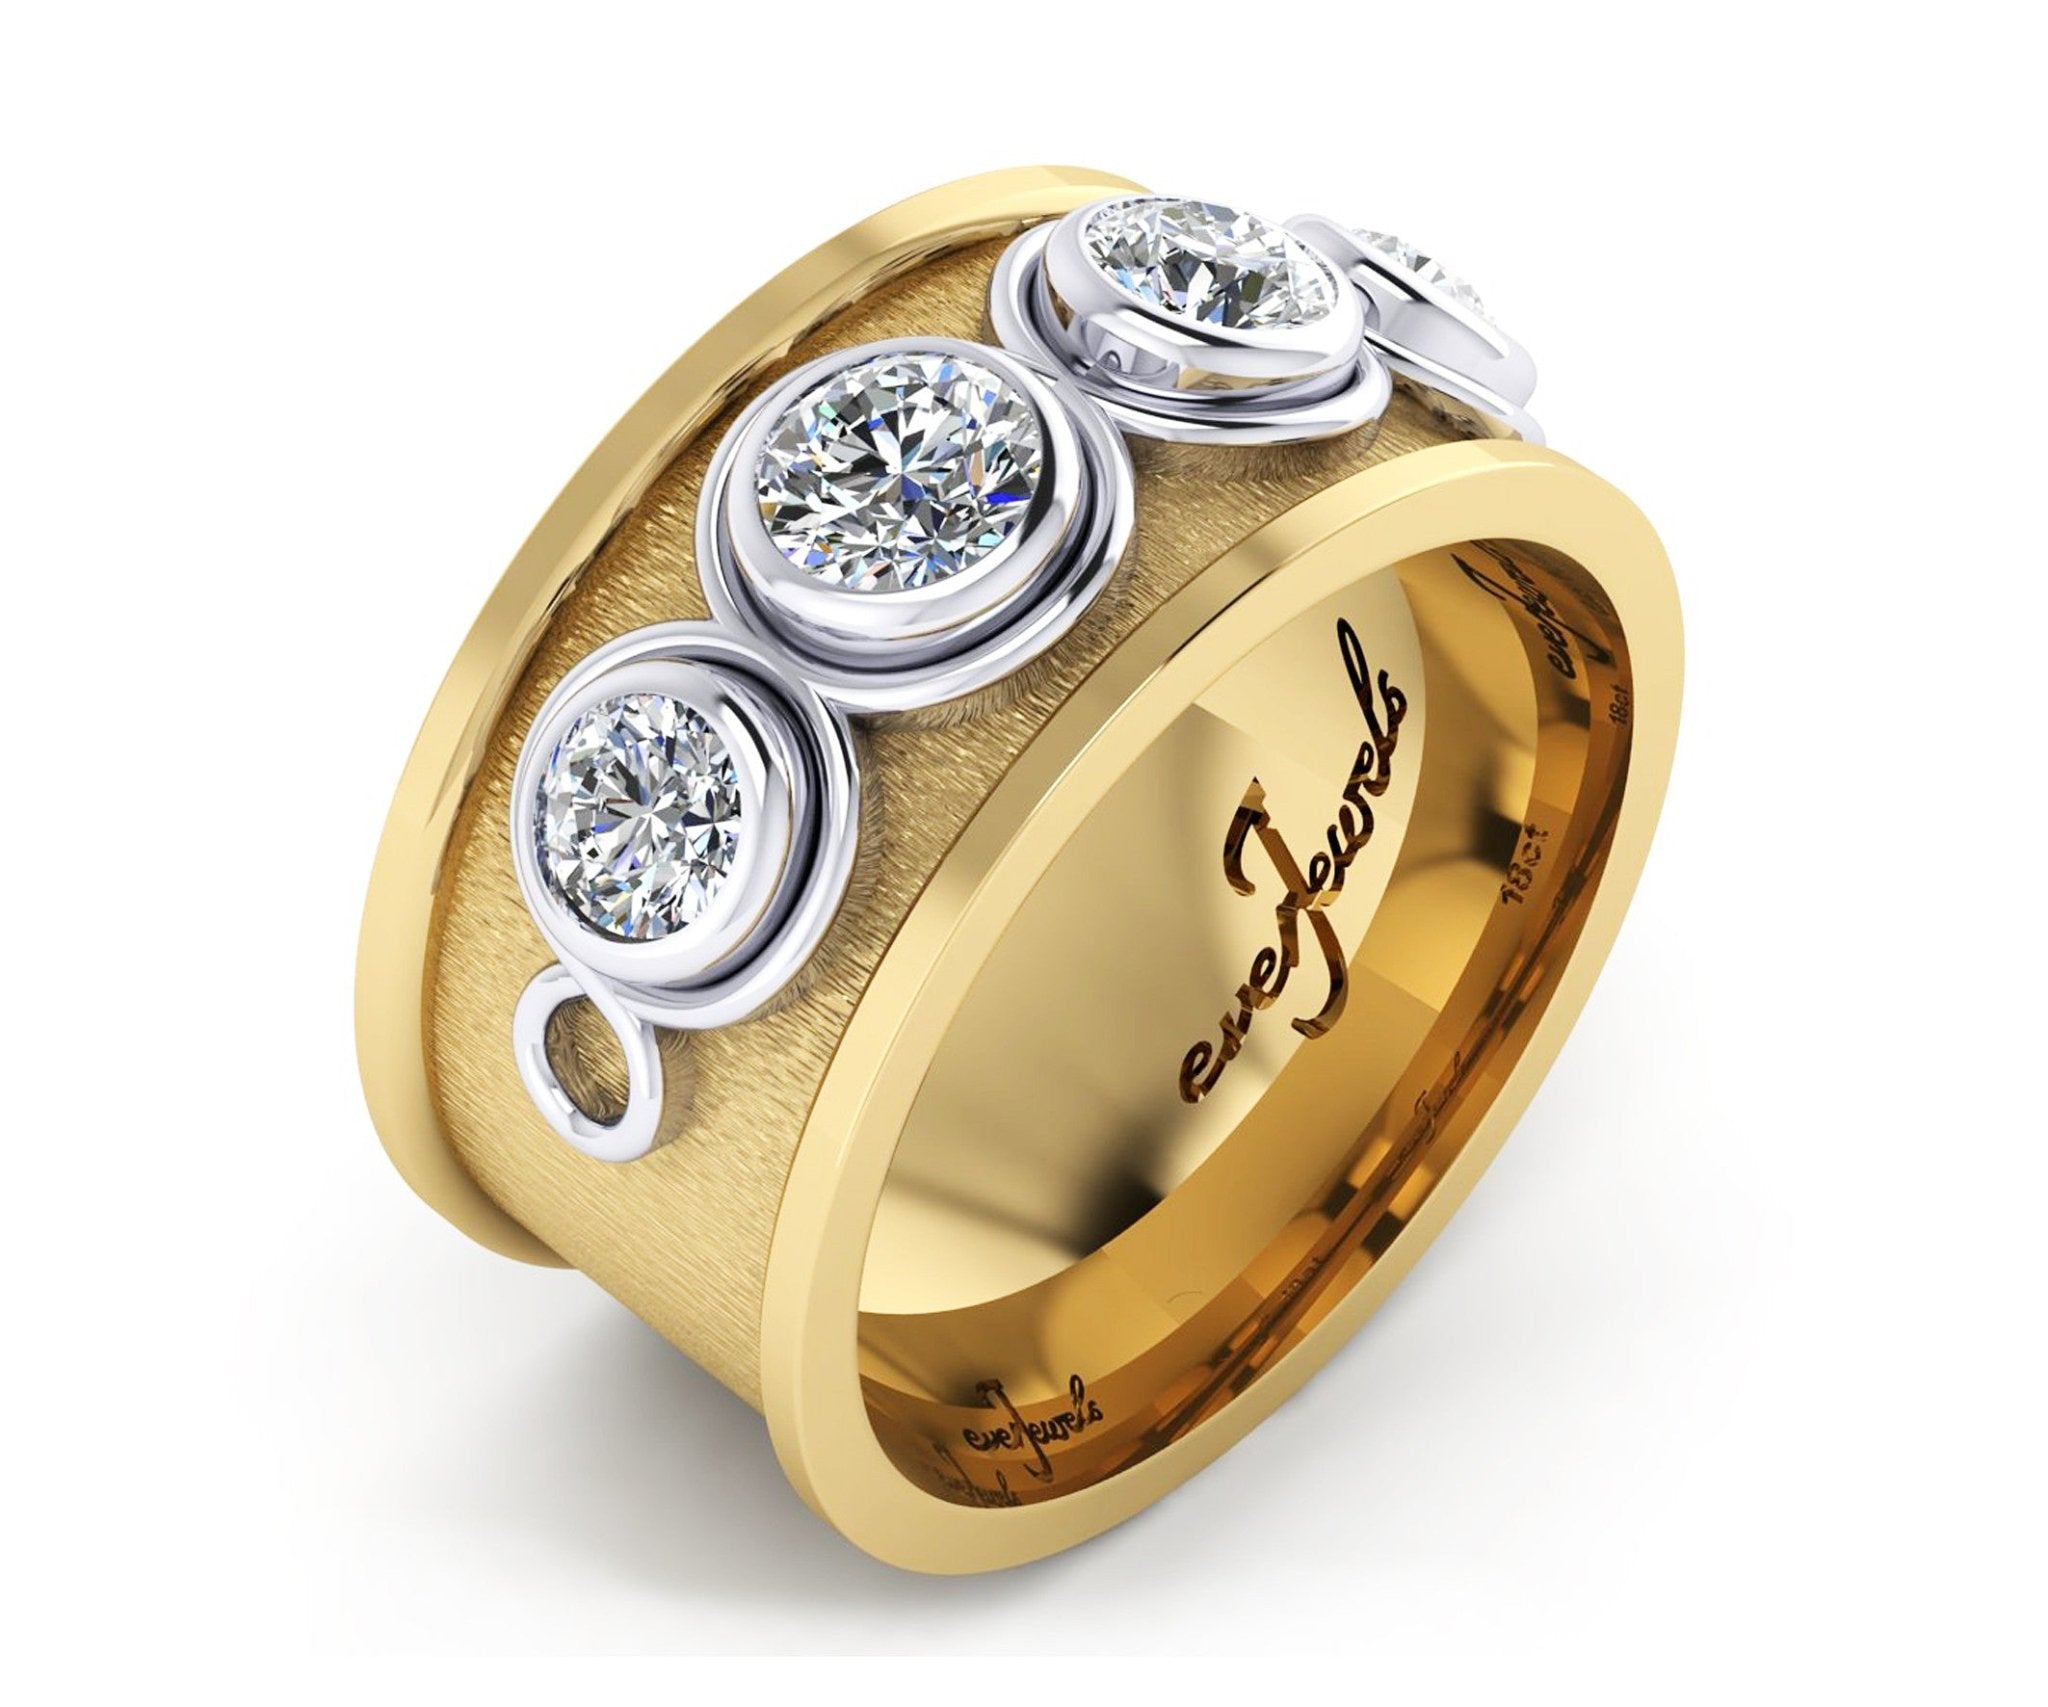 18ct Yellow and white gold dress ring with round brilliant diamonds - ForeverJewels Design Studio 8